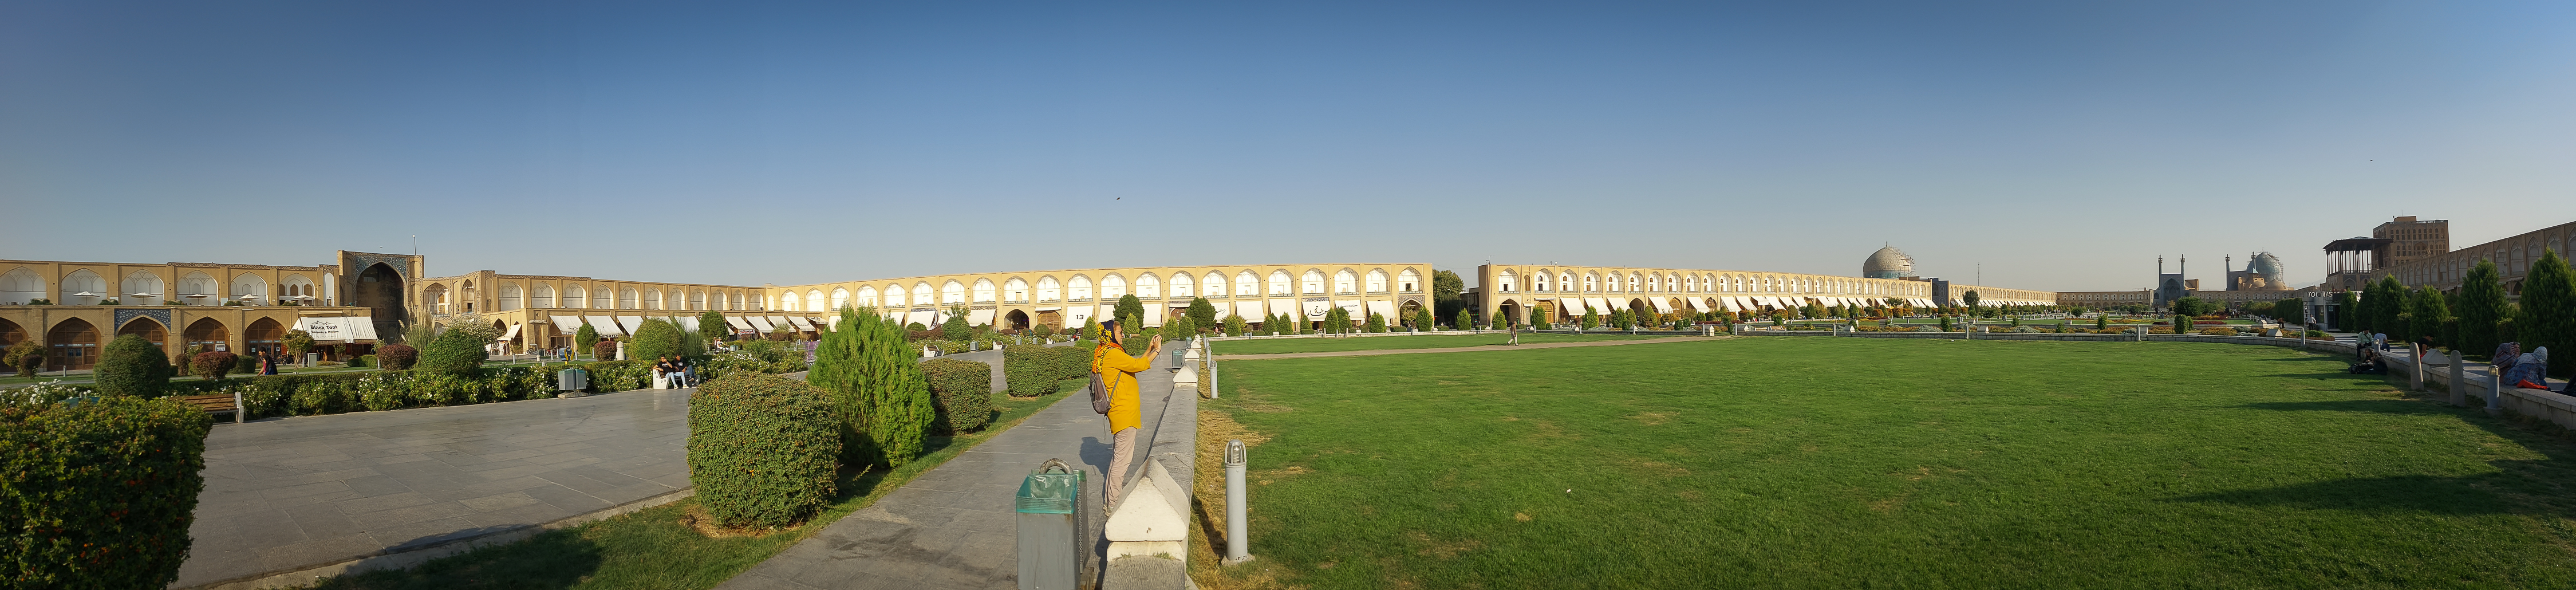 <span  class="uc_style_uc_tiles_grid_image_elementor_uc_items_attribute_title" style="color:#ffffff;">The mystique persian city of 'Isfahan' (you know it from the book and film 'Medicus')</span>